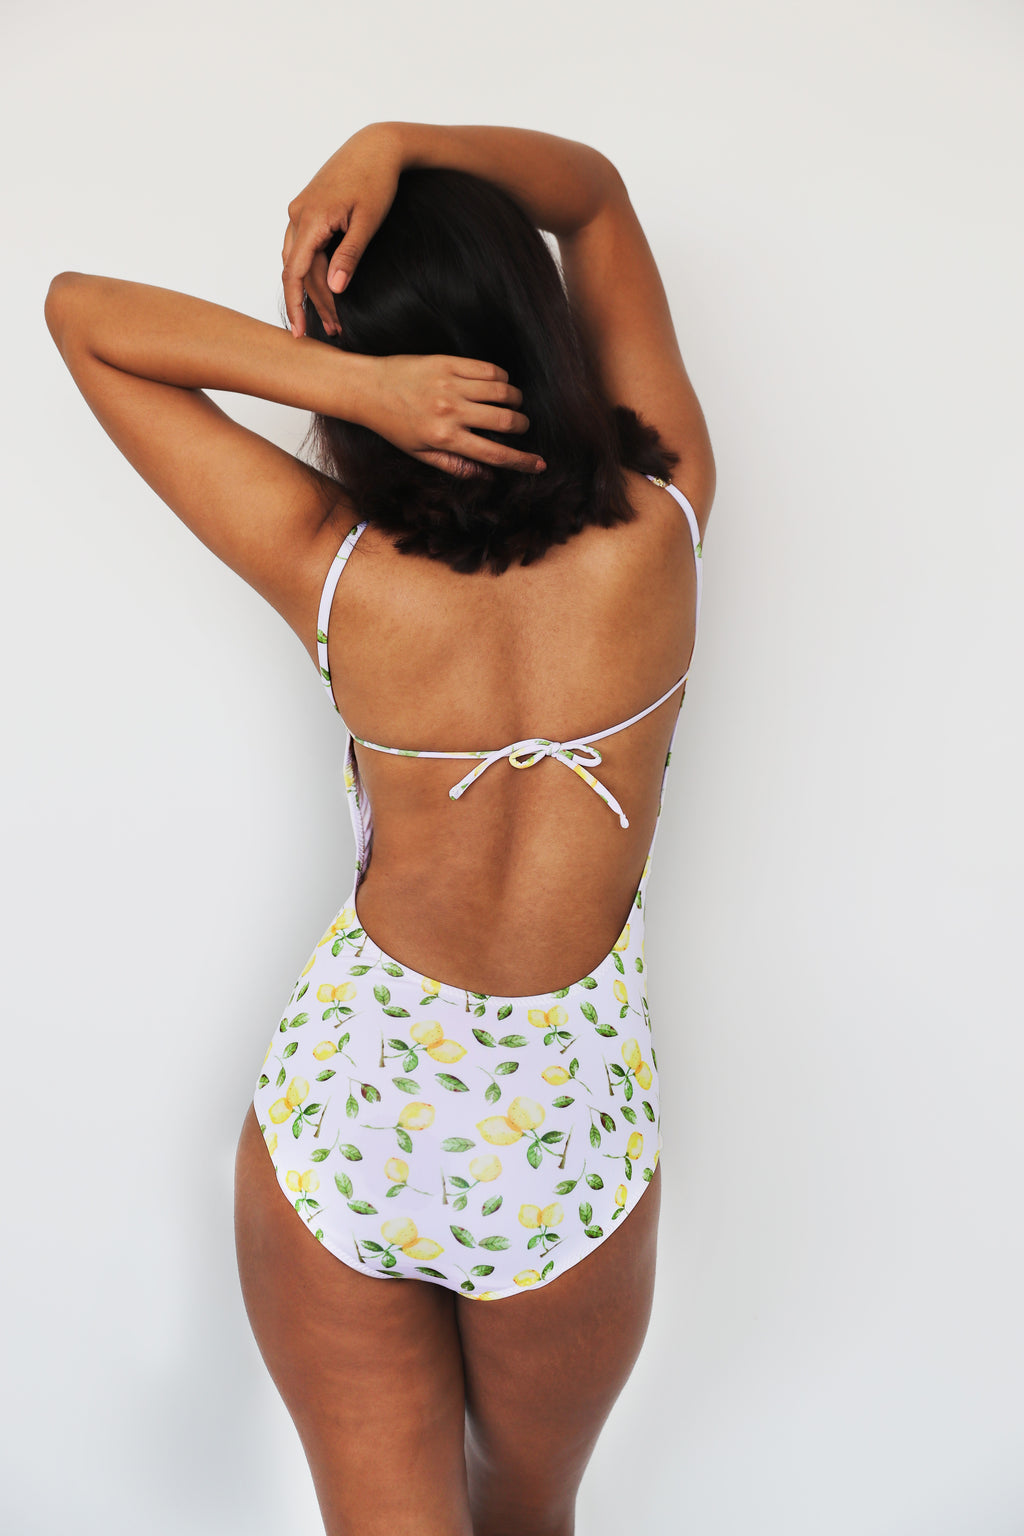 Models in Swimsuits -India Online- The Beach Company Shop Beachwear - lemon swimsuit - lemon print swimsuit - white and yellow swimsuit - full coverage swimsuit - adjustable strap swimsuit - cheap swimsuits- affordable swimsuits- beach party swimsuits 